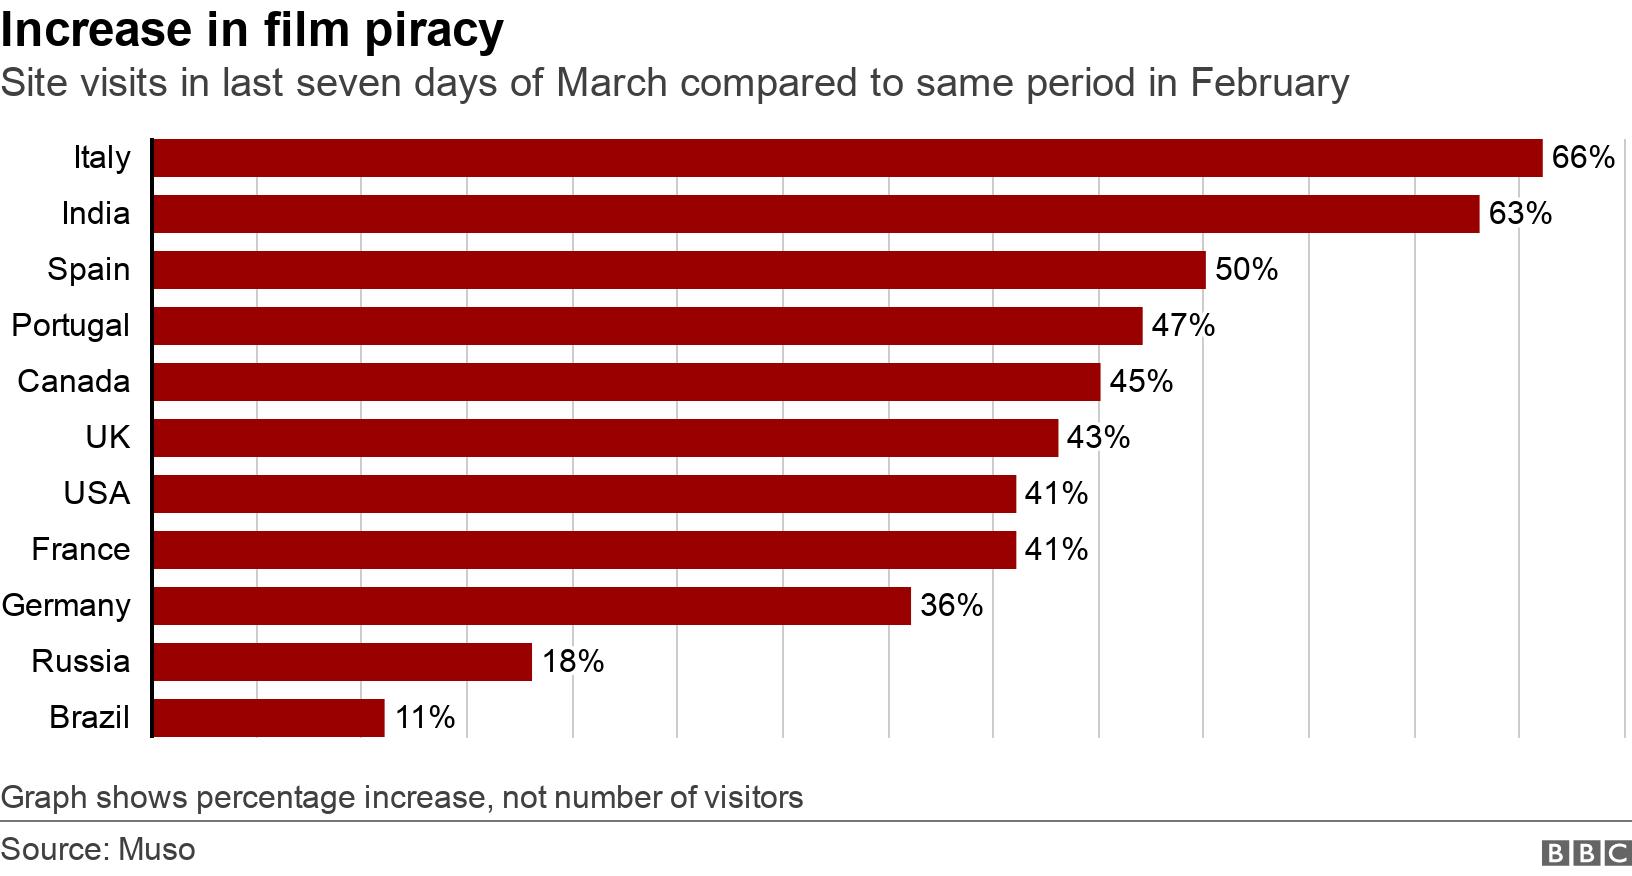 Increase in film piracy. Site visits in last seven days of March compared to same period in February. Italy + 66%
India + 63%
Spain + 50%
Portugal + 47%
Canada + 45%
UK + 43%
USA + 41%
France + 41%
Germany + 36%
Russia +17% Graph shows percentage increase, not number of visitors.